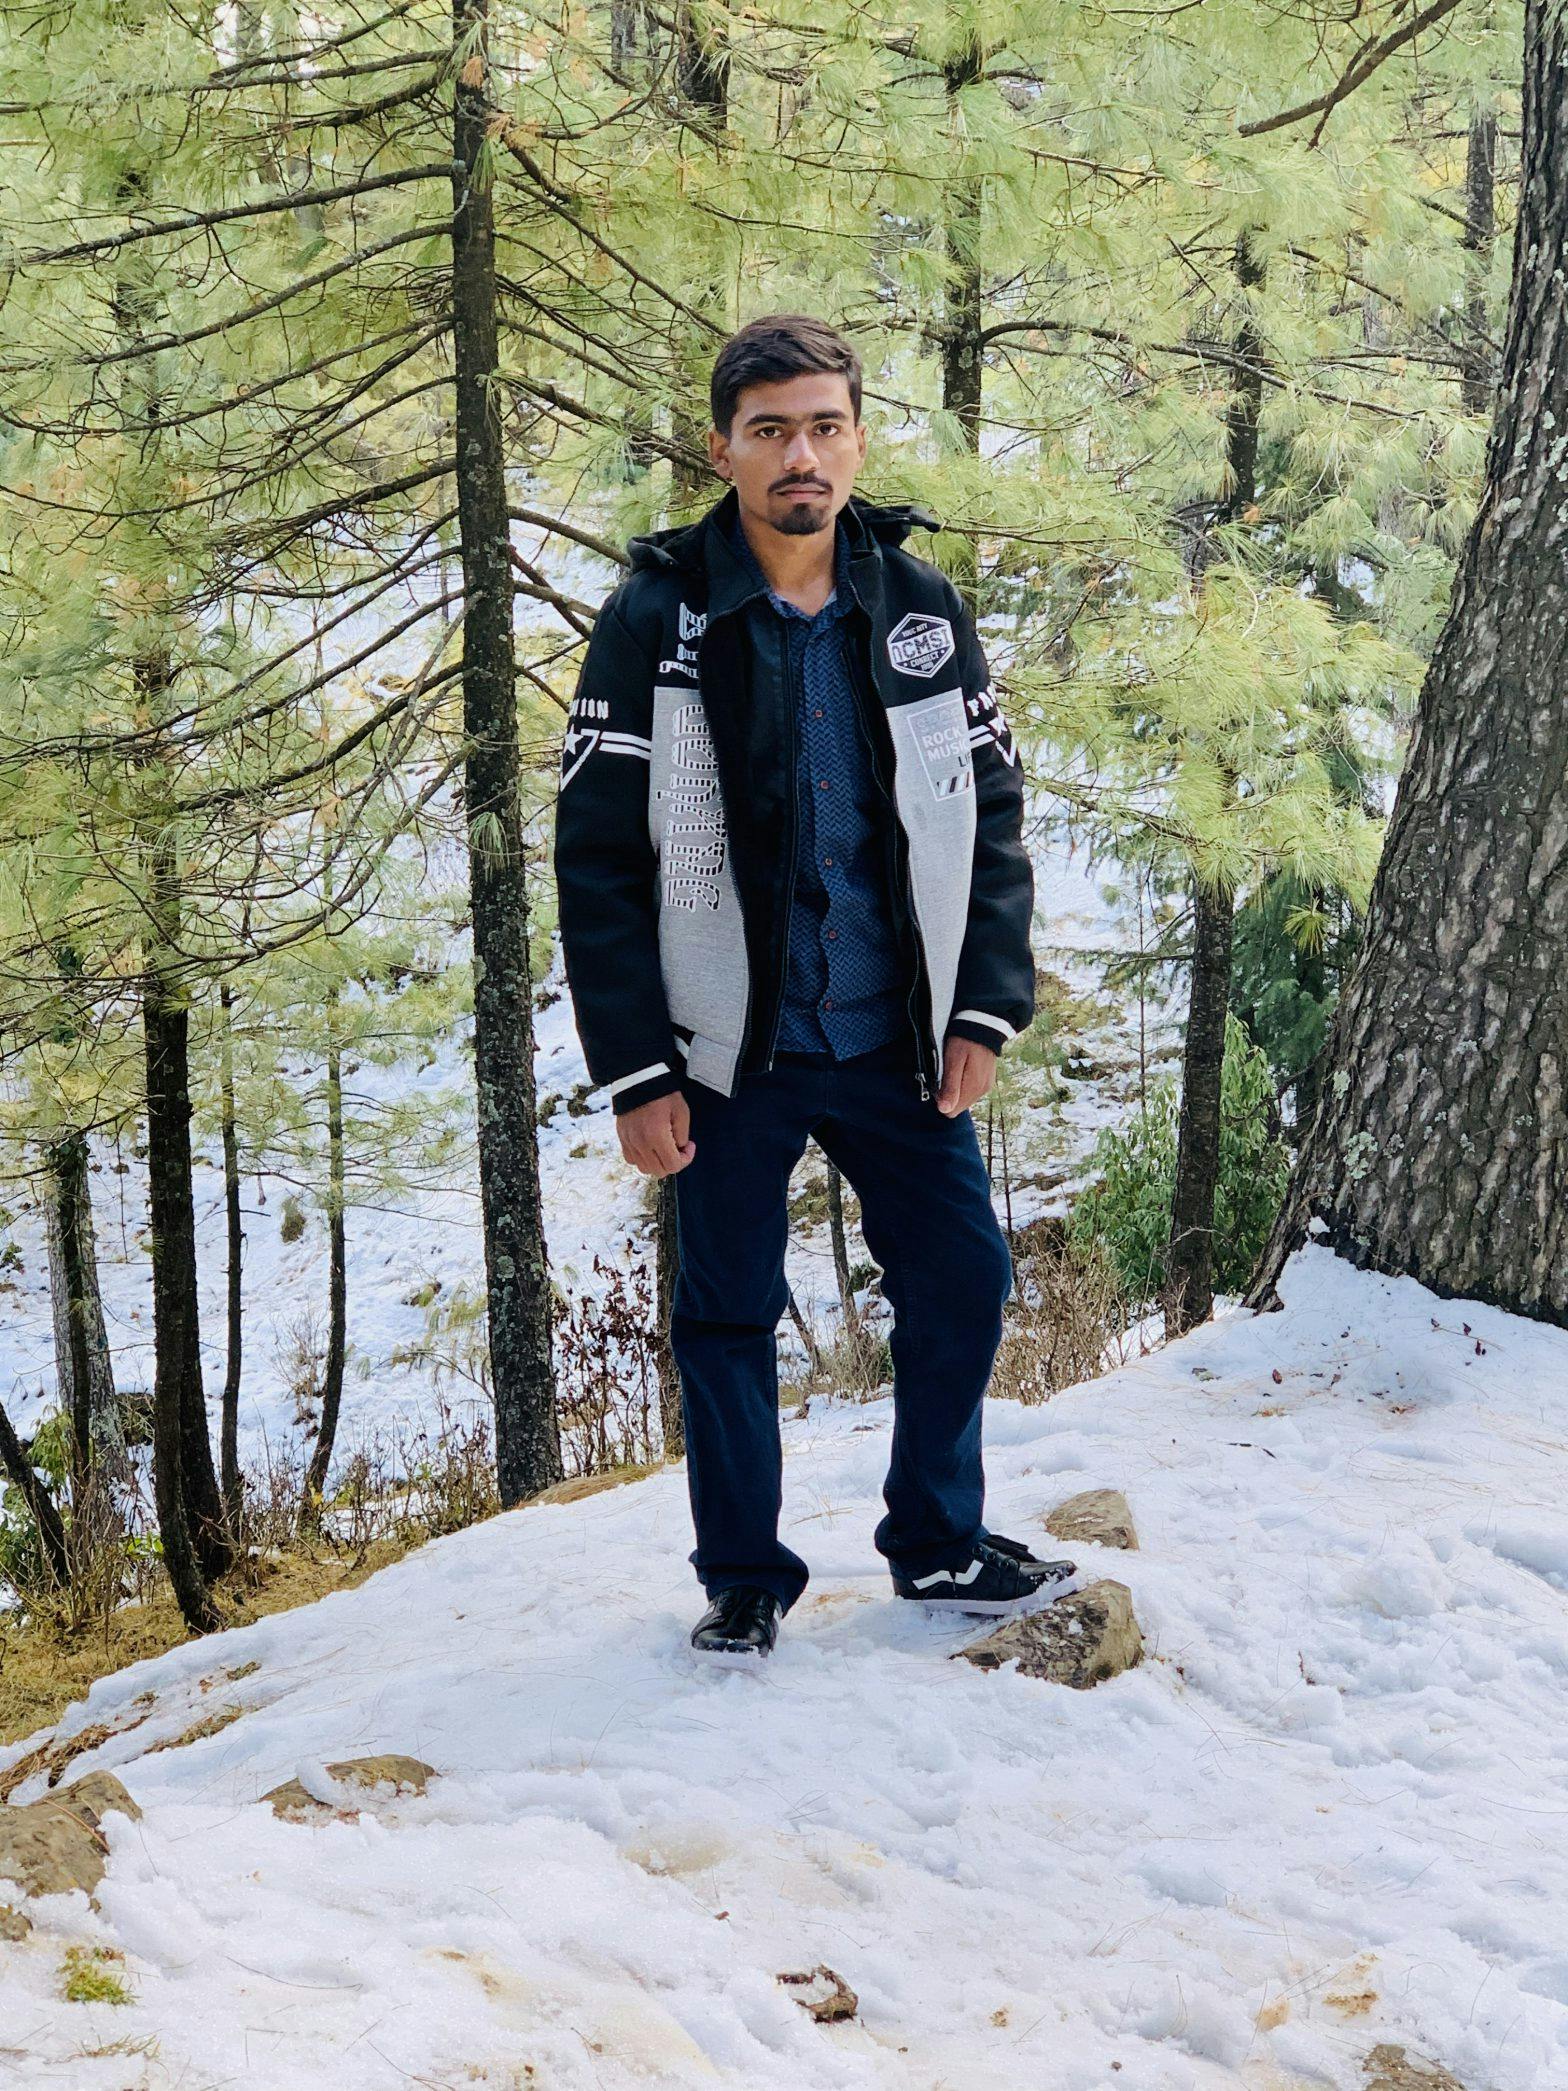 Me standing on snow in murree